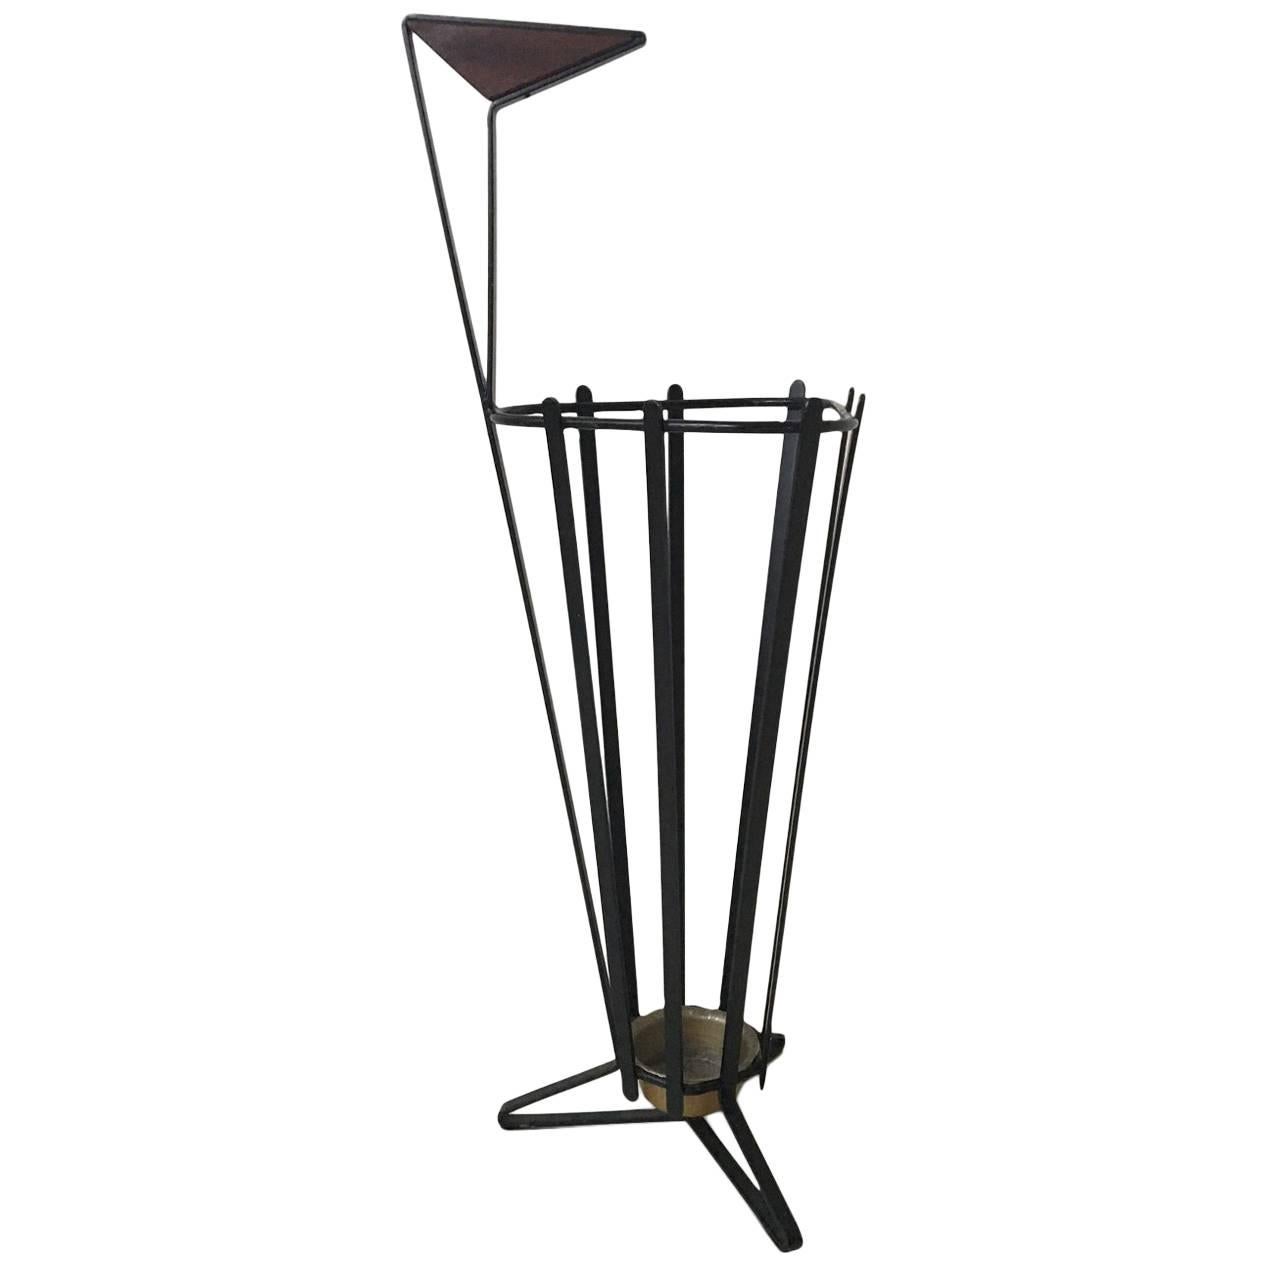 Metal and Teak Tripod Umbrella Stand in Style of Mathieu Matégot, 1950s For Sale